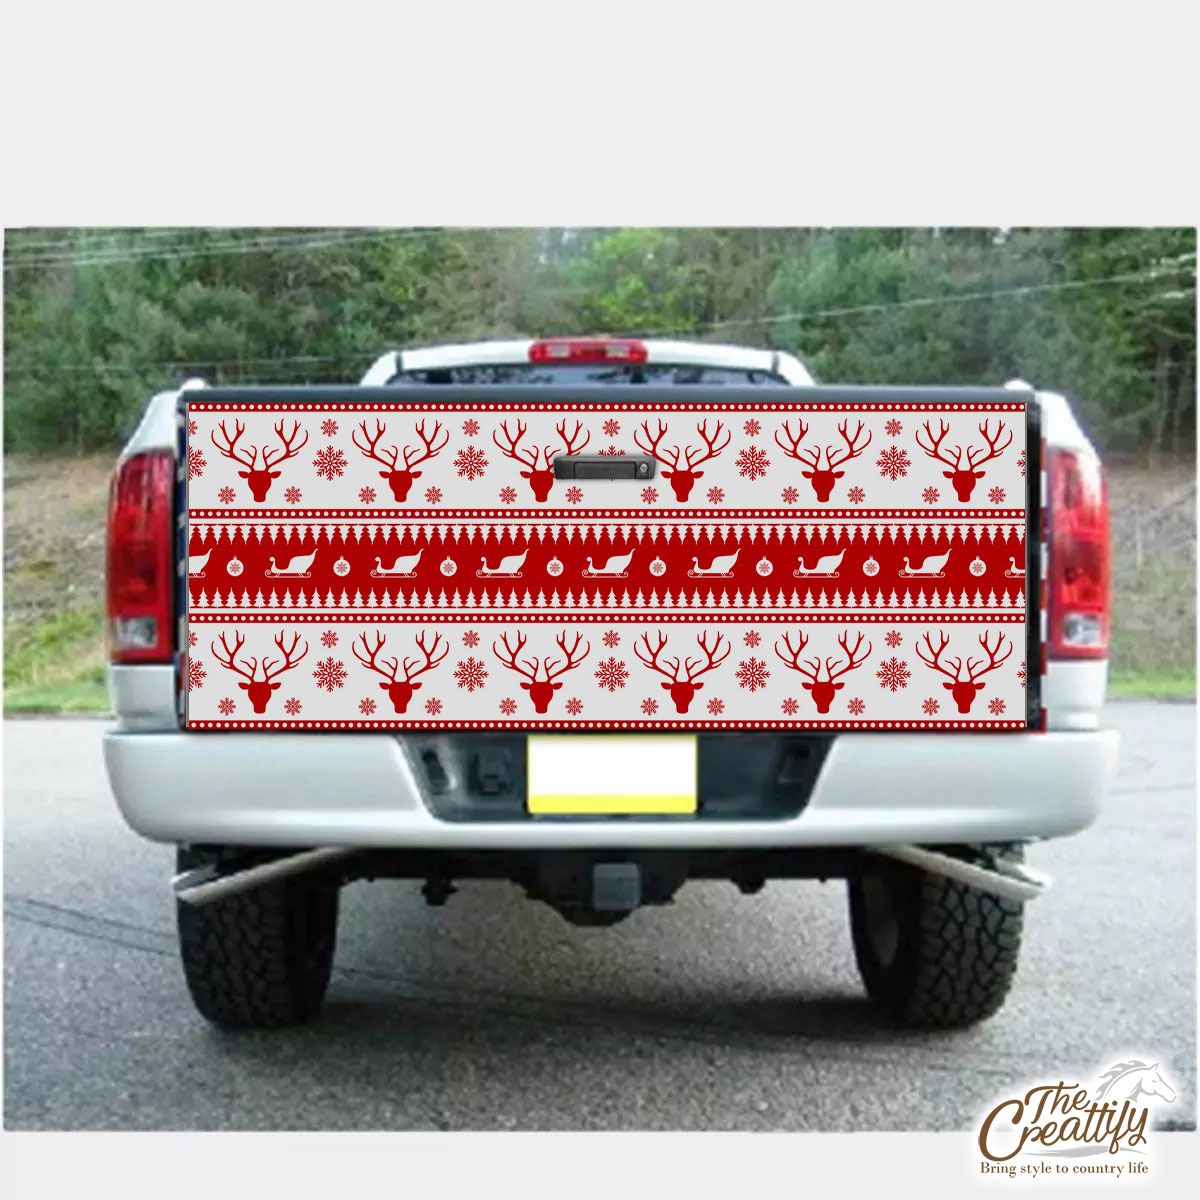 Red And White Reindeer, Santa Sleigh, Christmas Balls On The Snowflake Background Truck Bed Decal